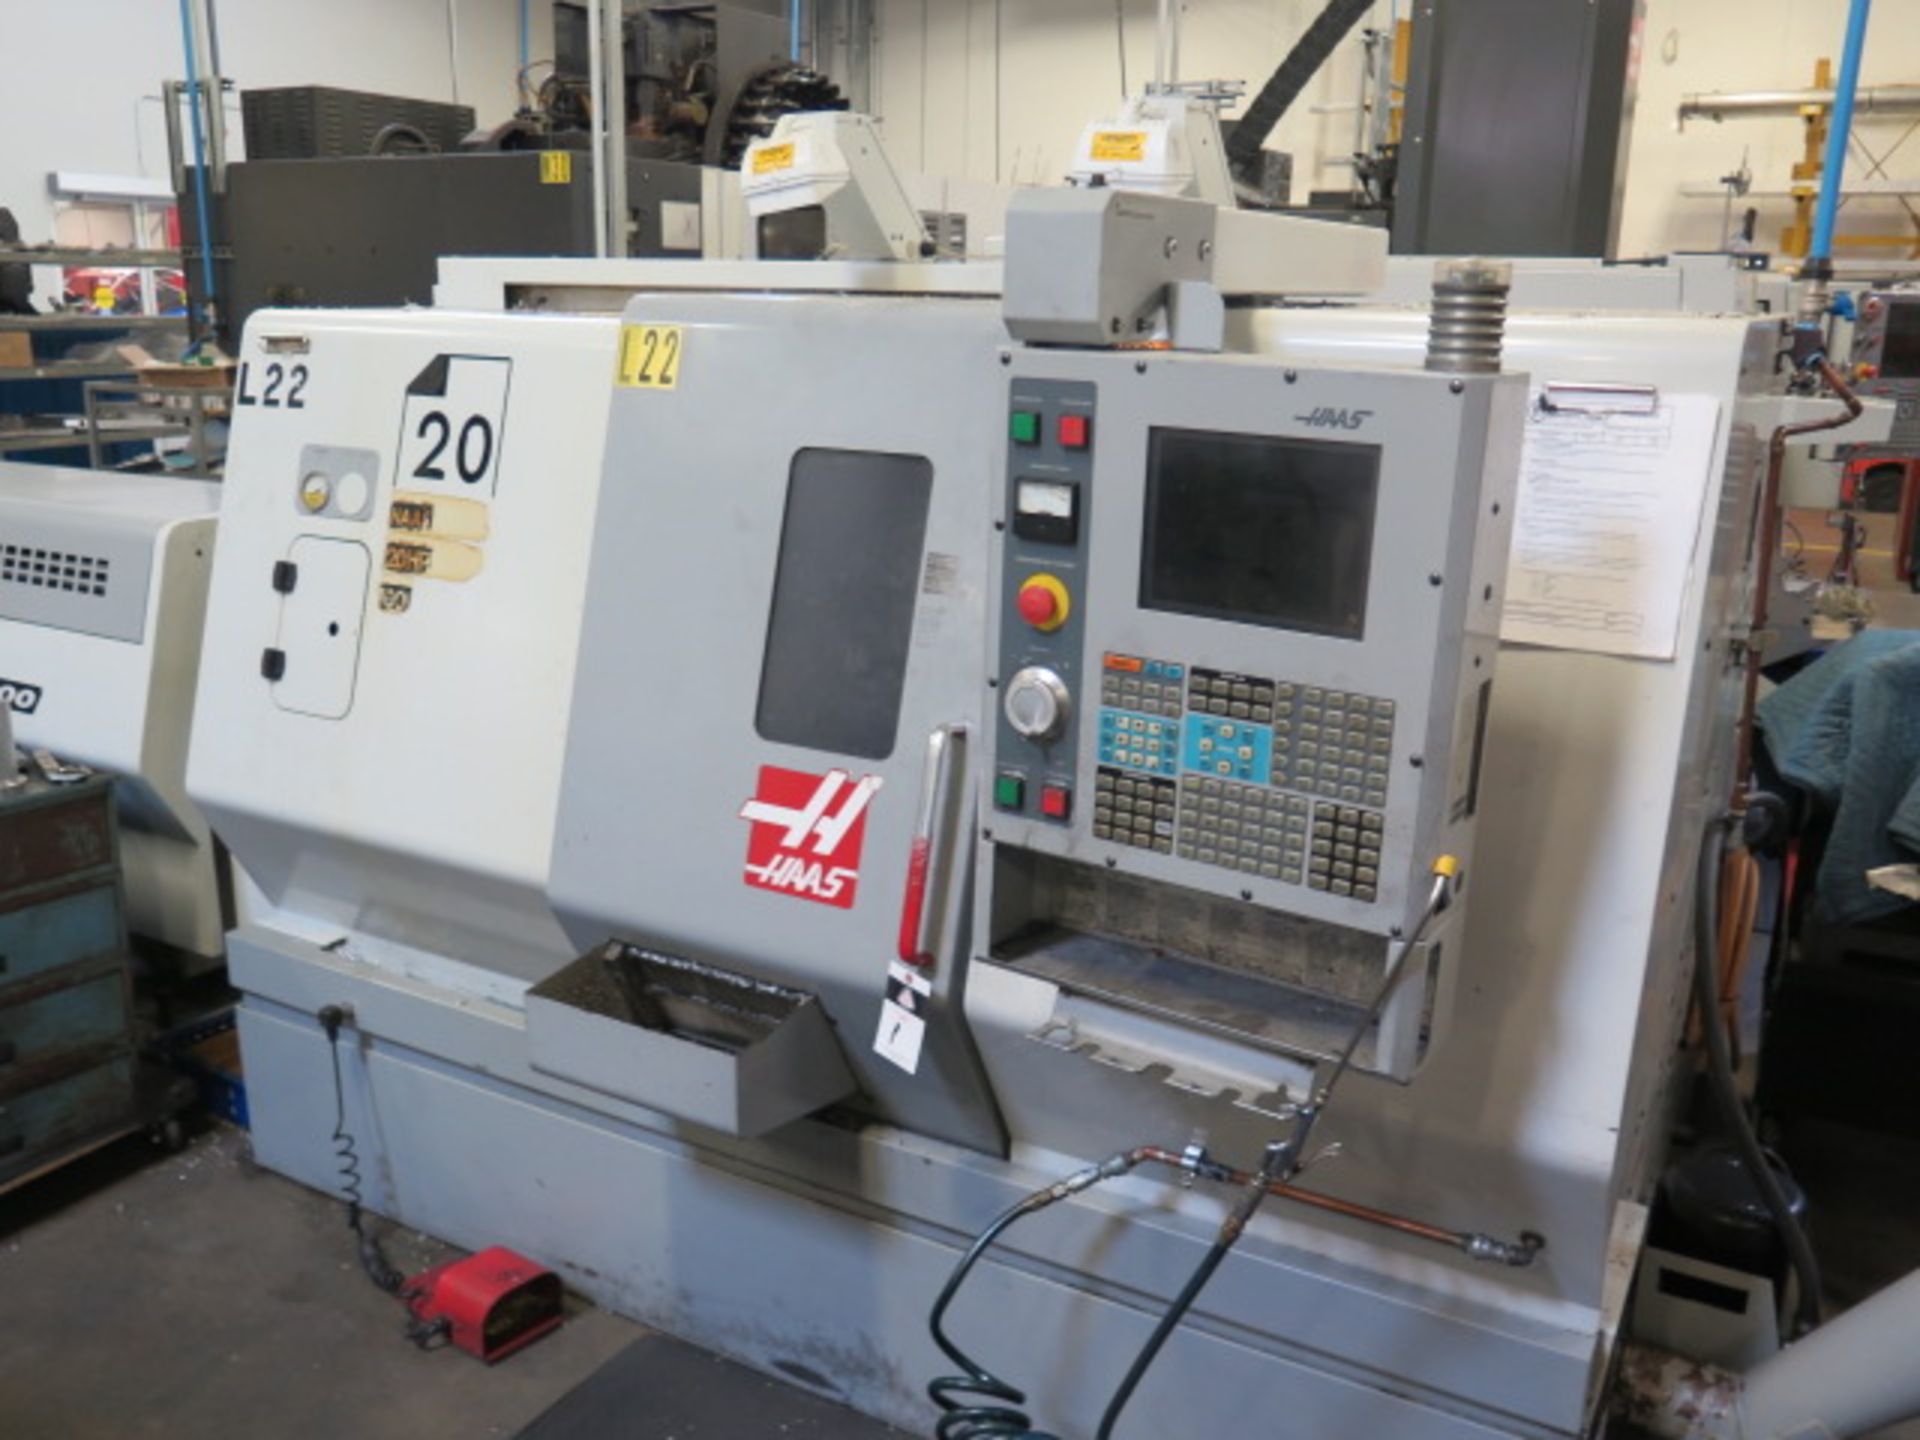 2004 Haas SL-20 CNC Turning Center (TOOLING NOT INCLUDED) w/ Tool Presetter, 10-Station, SOLD AS IS